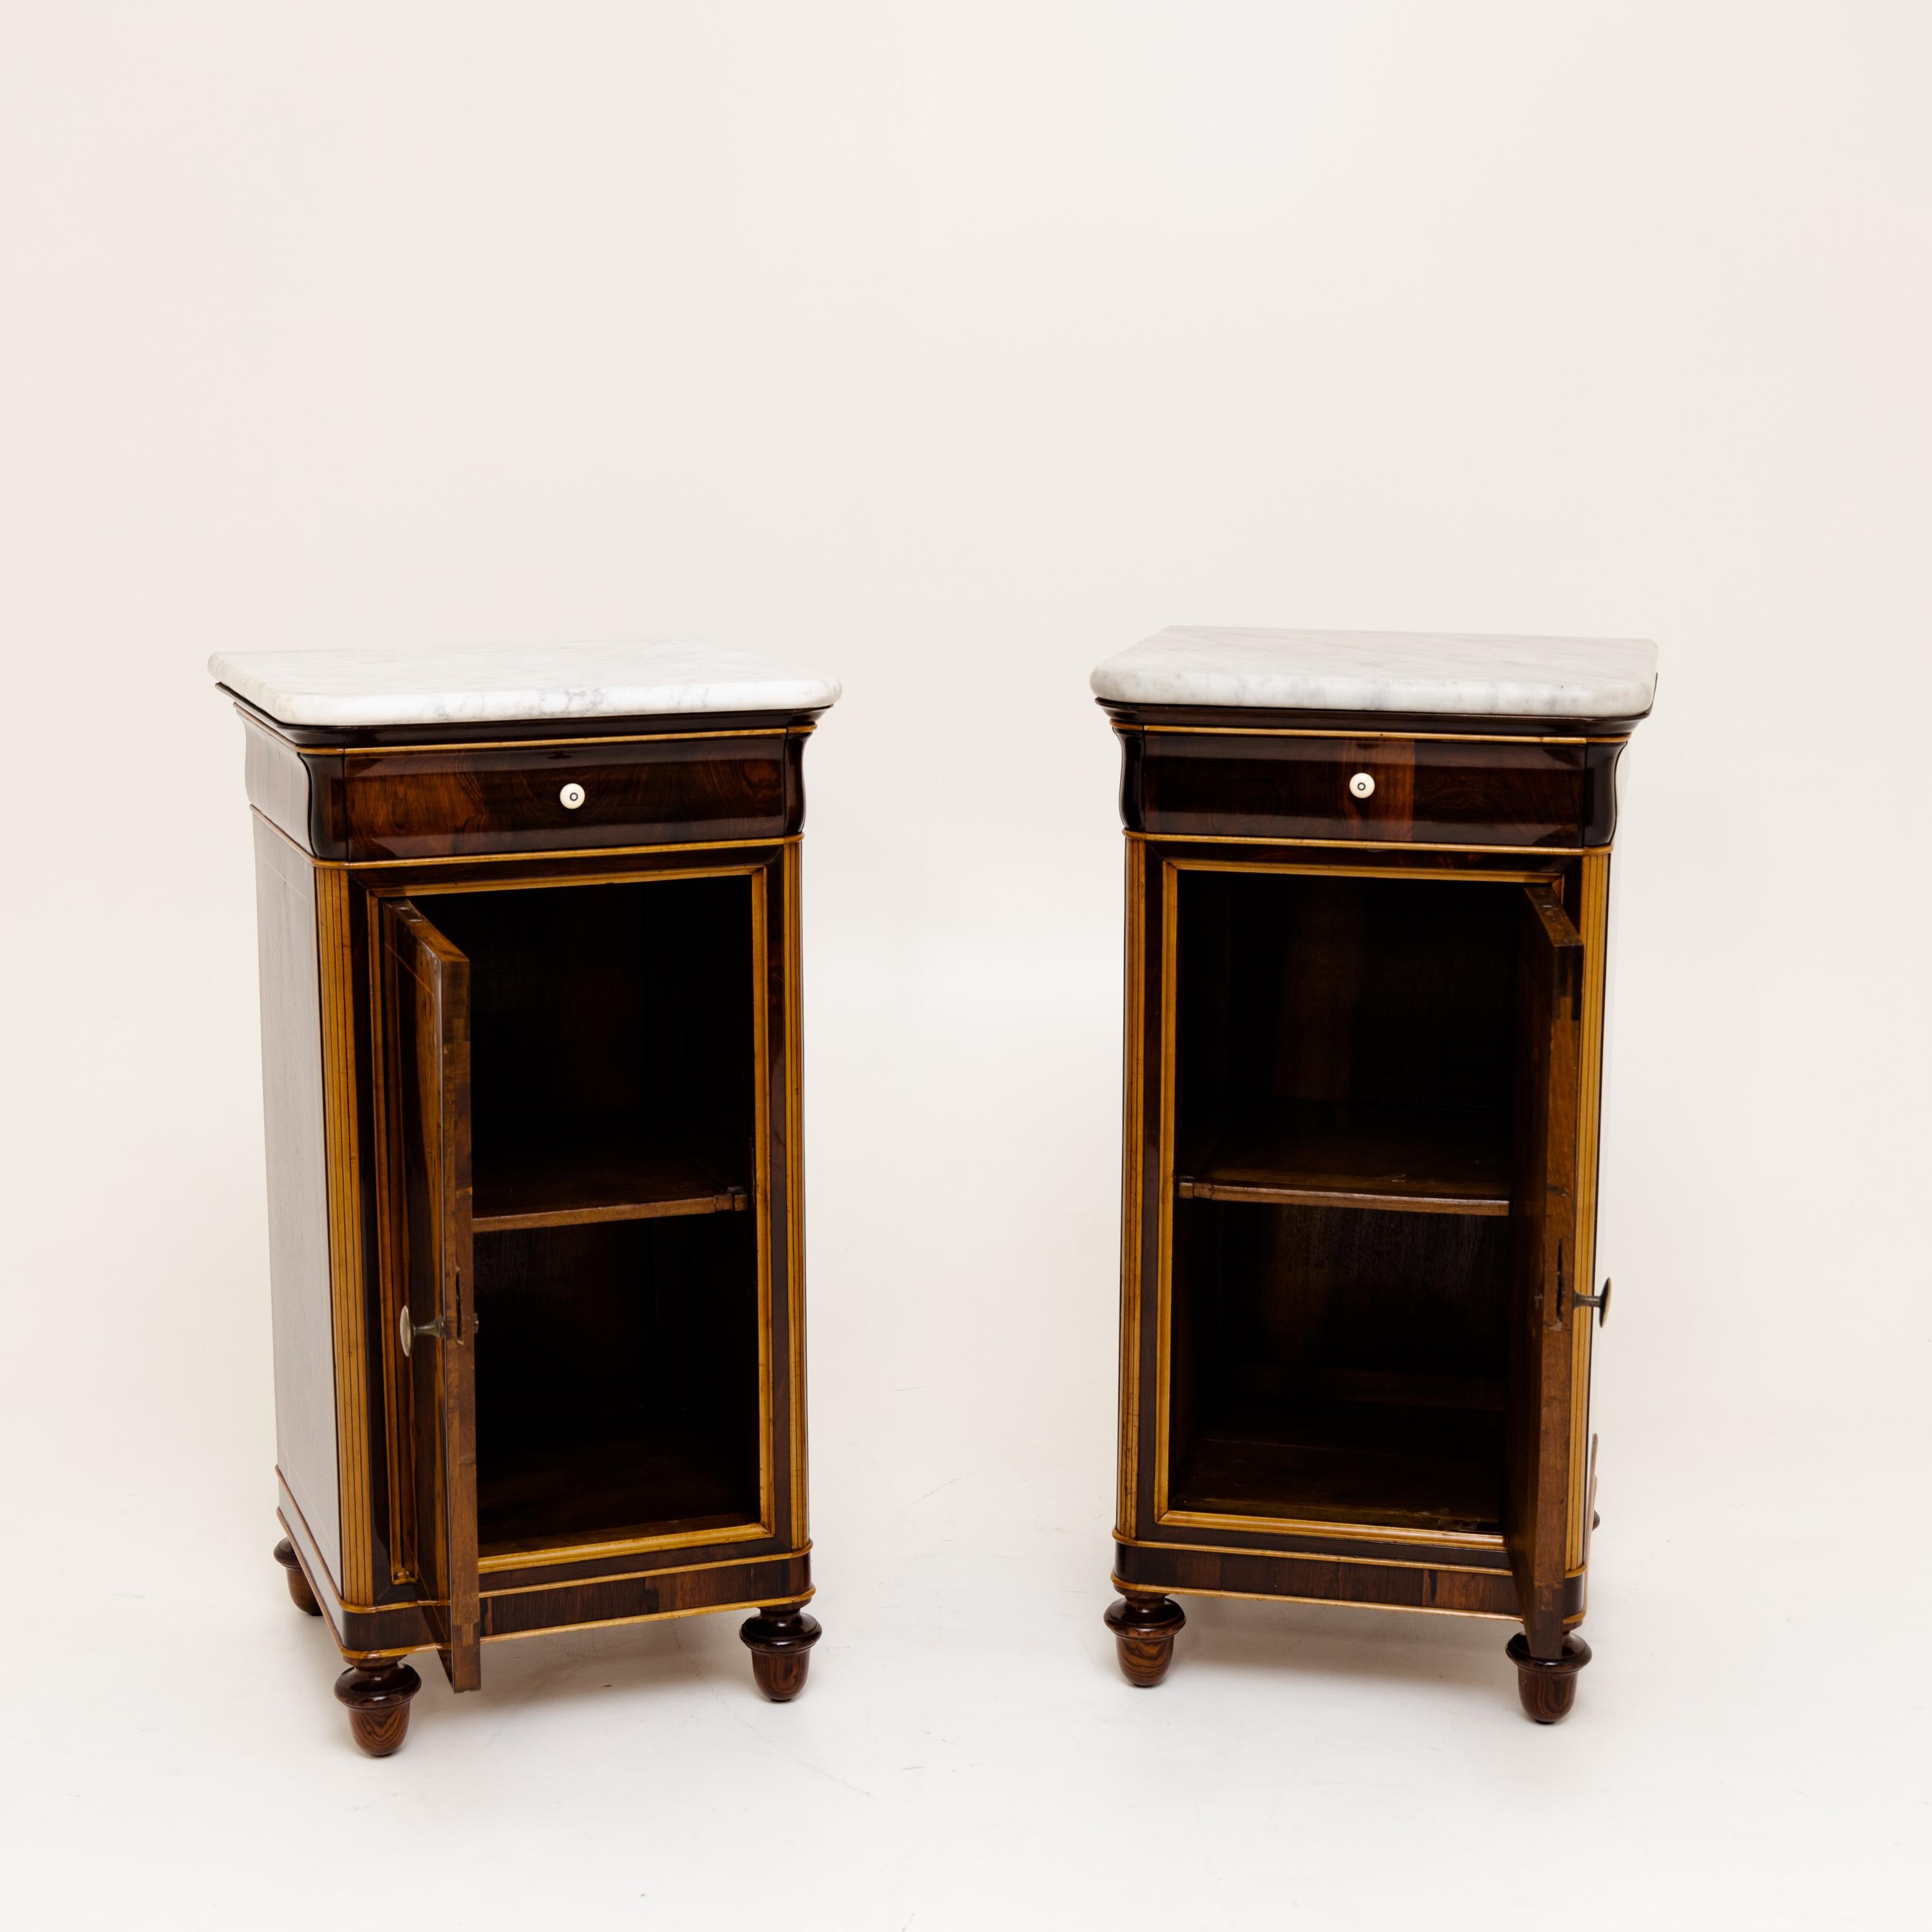 Pair of oppositely designed bedside cabinets on conical legs with one door, one drawer and a marble top. Mahogany and maple veneered.